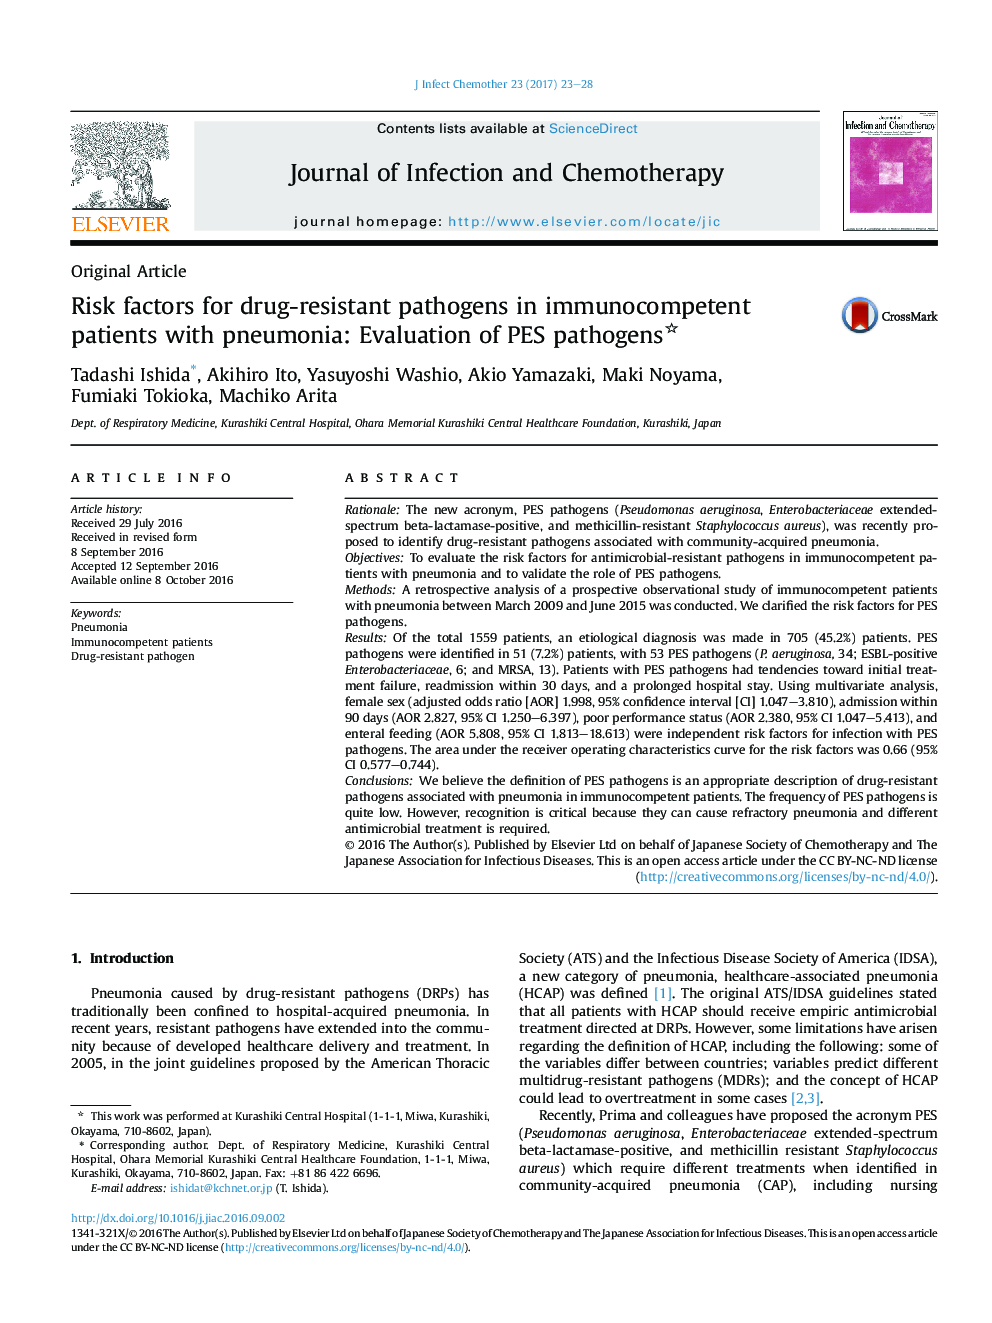 Risk factors for drug-resistant pathogens in immunocompetent patients with pneumonia: Evaluation of PES pathogens